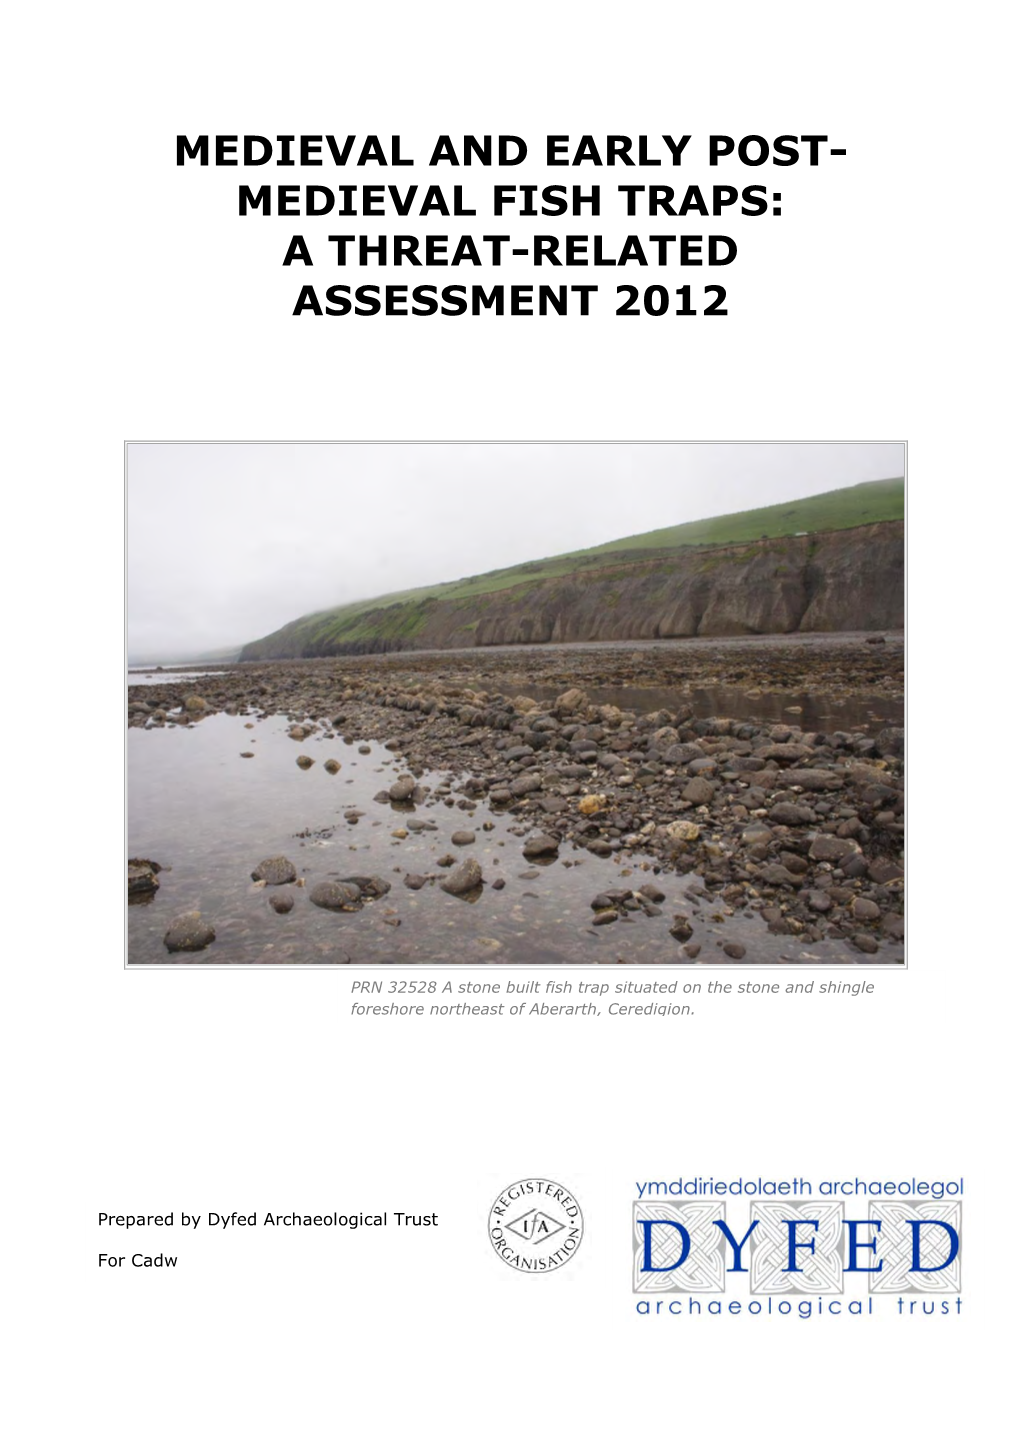 Medieval Fish Traps: a Threat-Related Assessment 2012